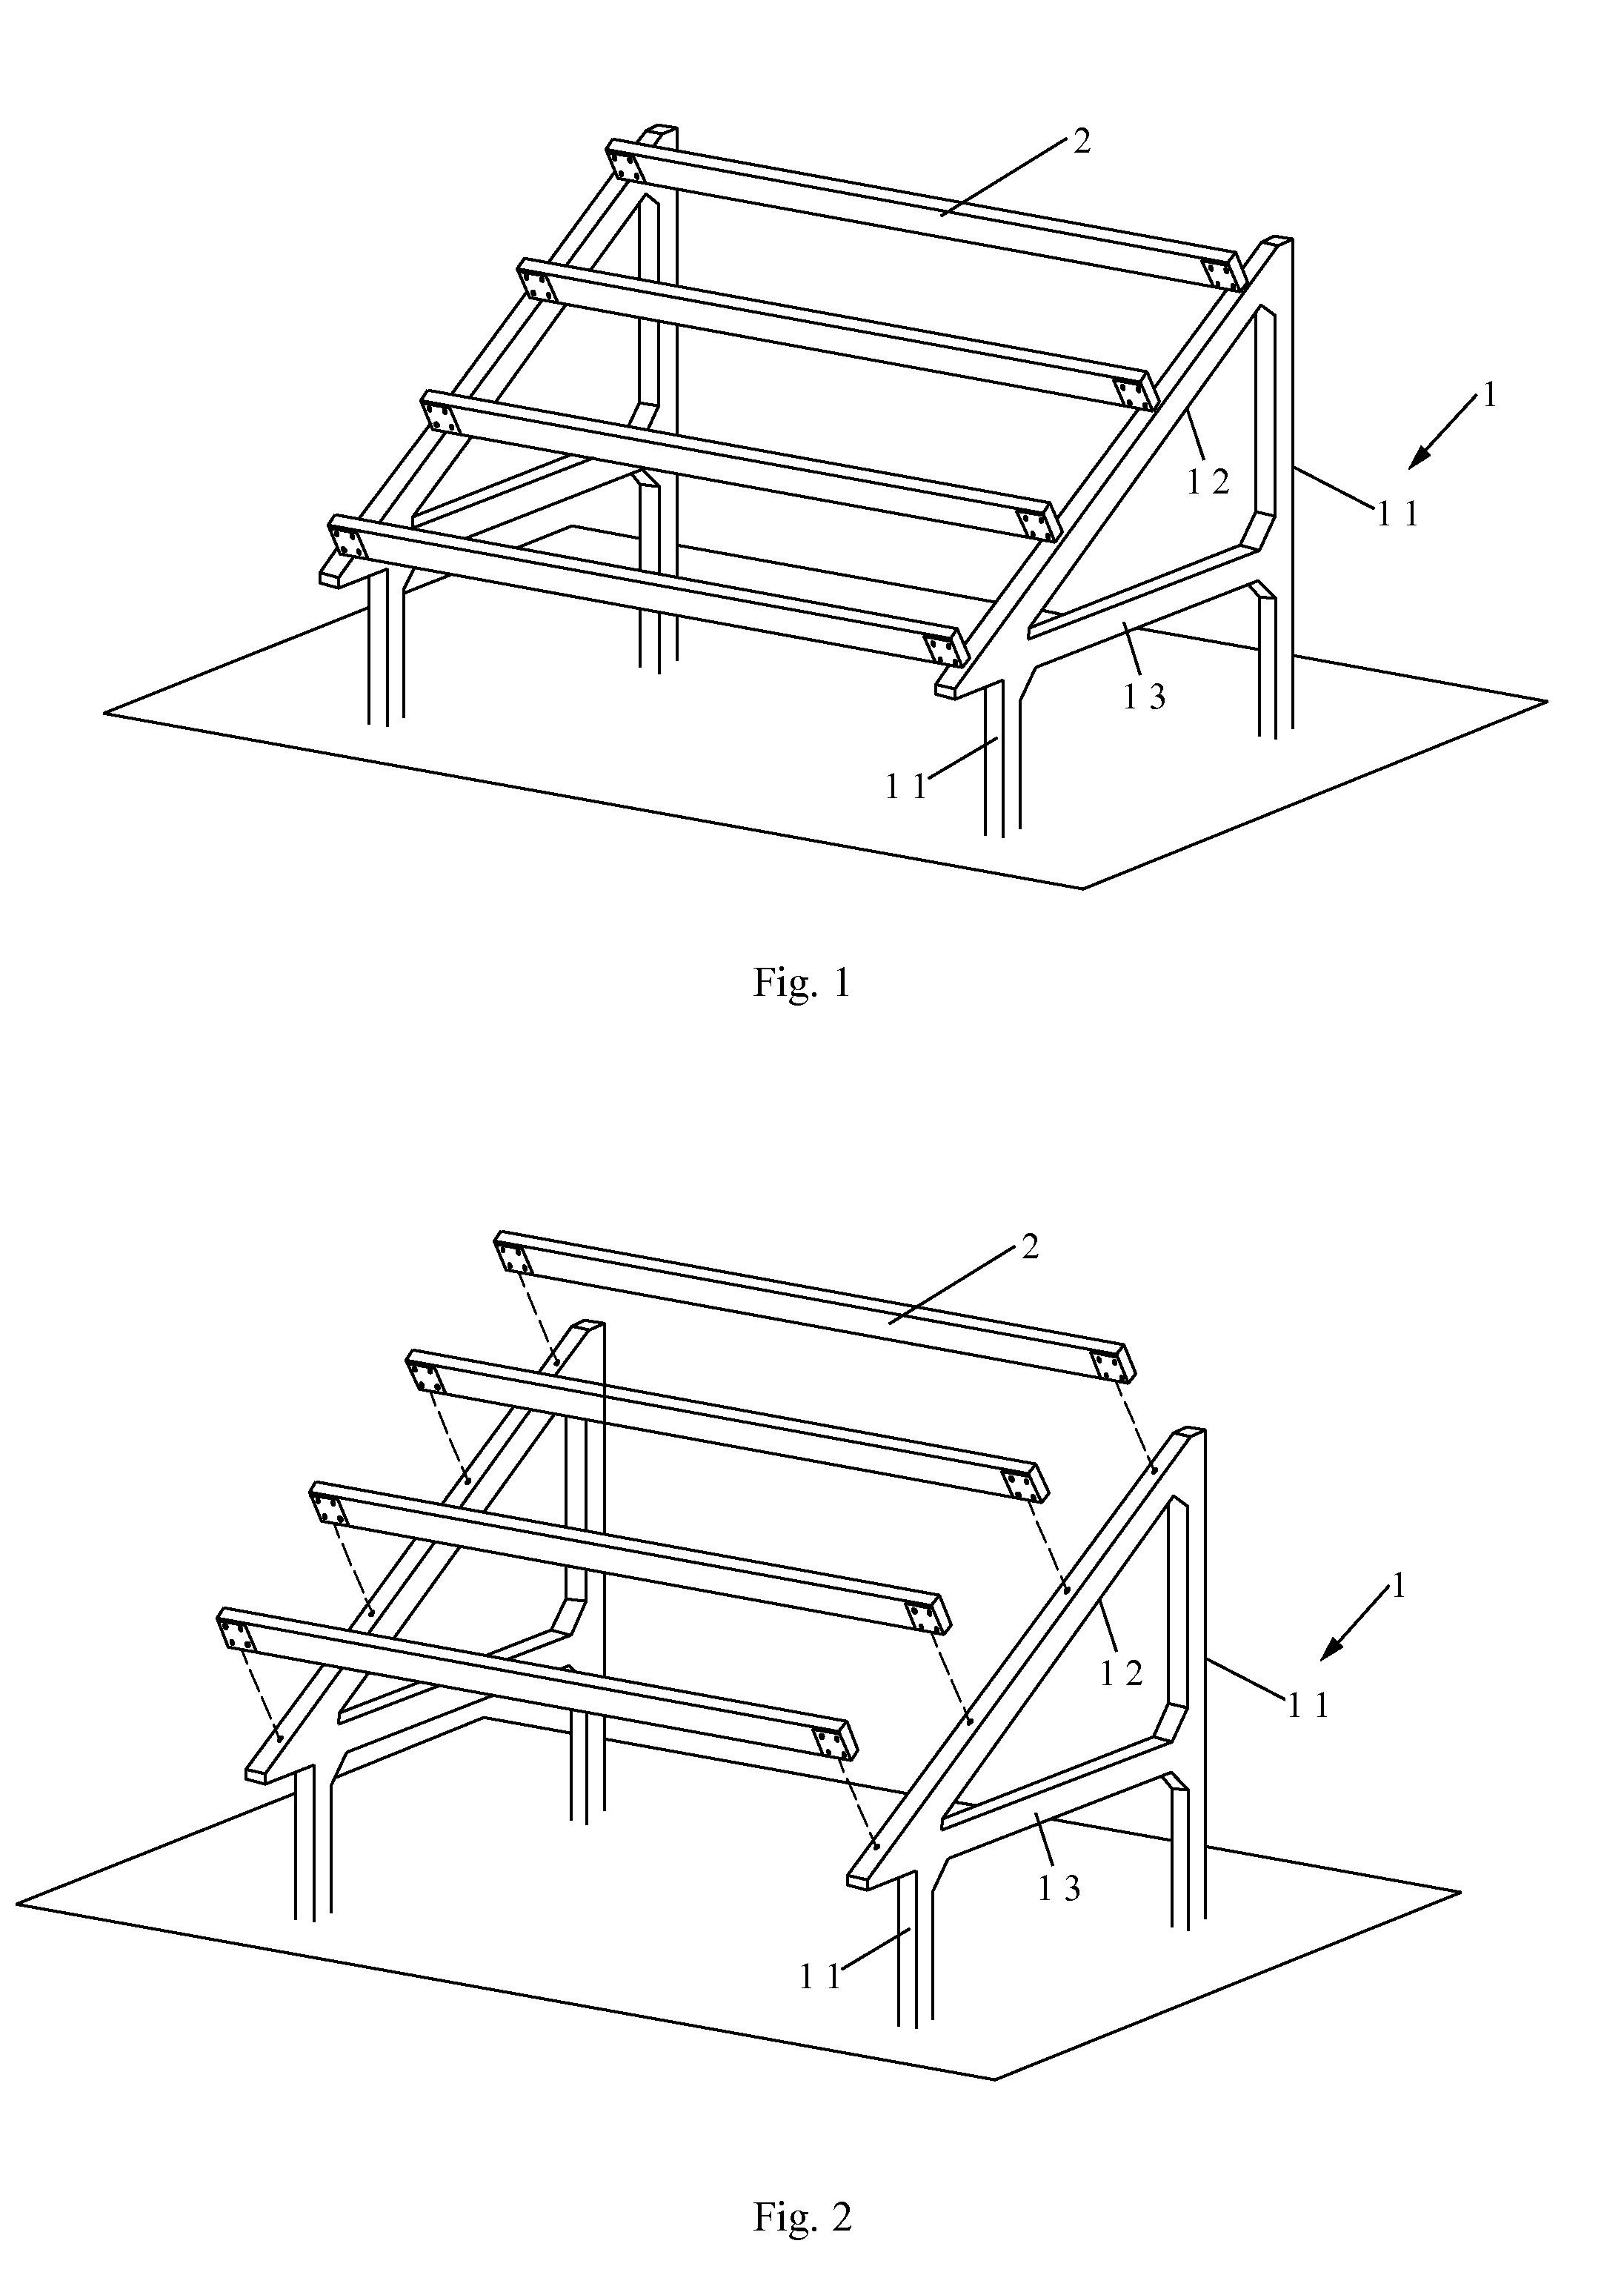 Support frame for solar energy device